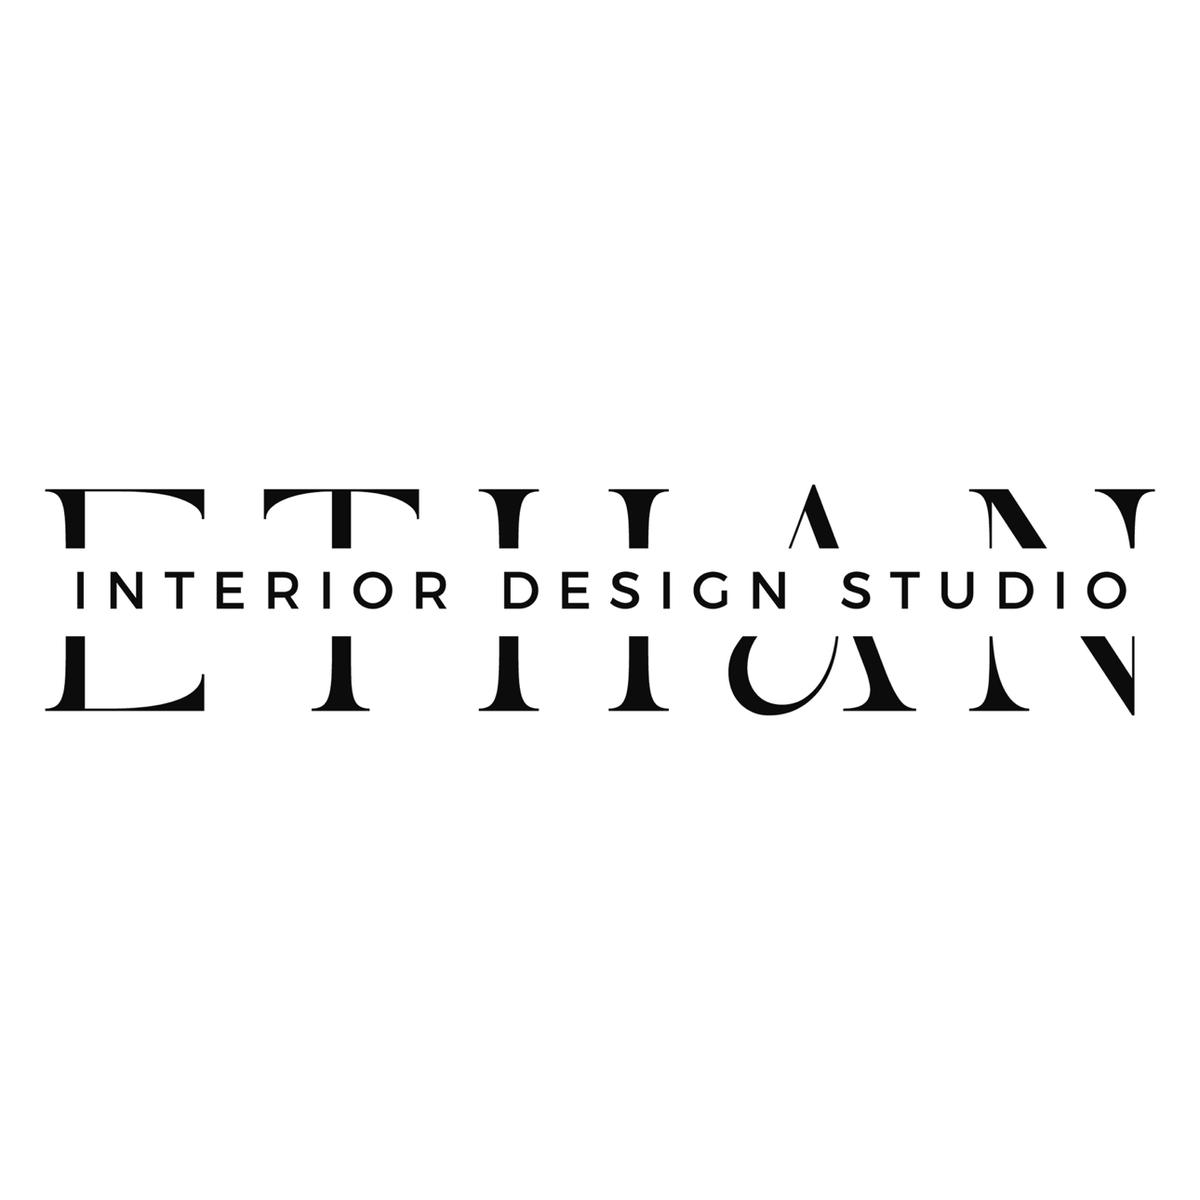 Ethan Interiors's images